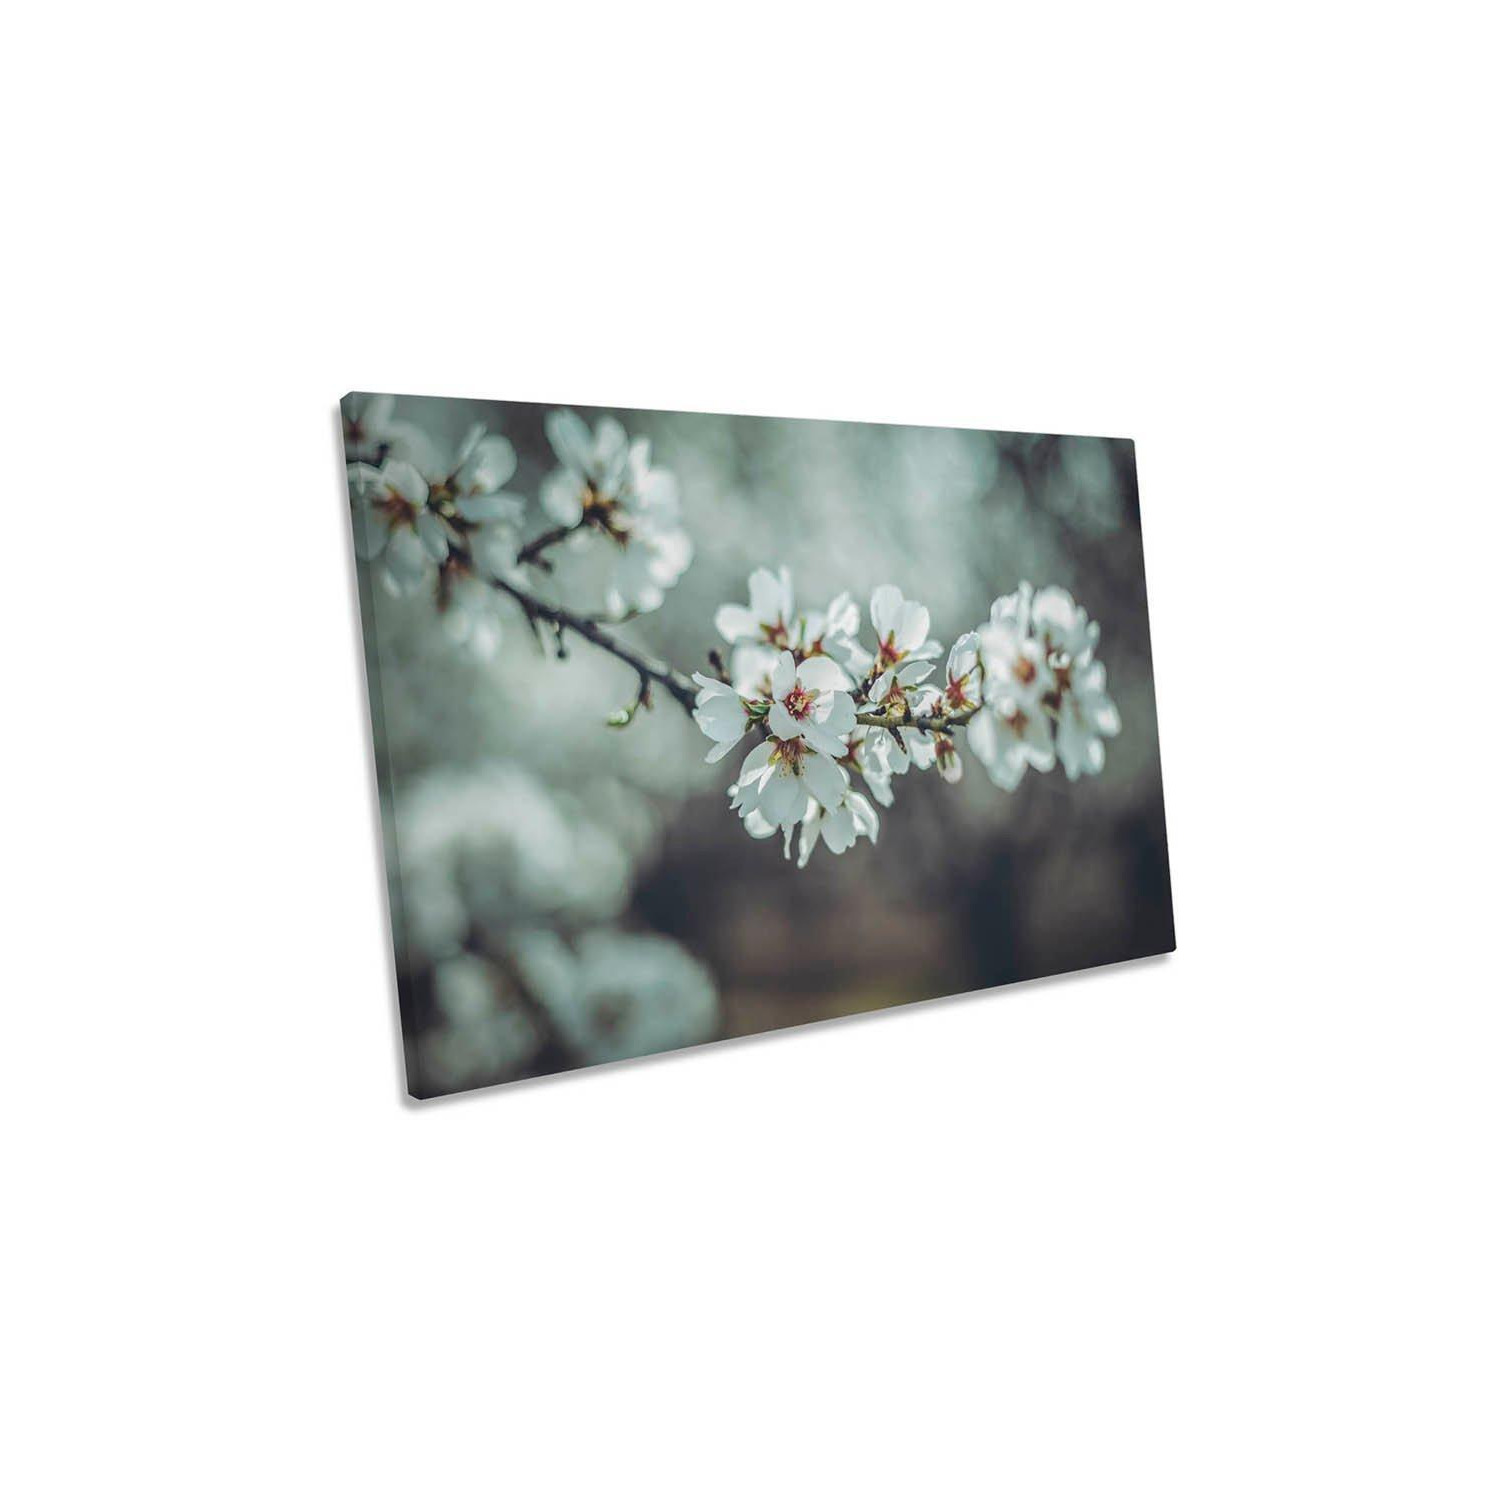 Almond Blossoms Floral Flowers Spring Canvas Wall Art Picture Print - image 1